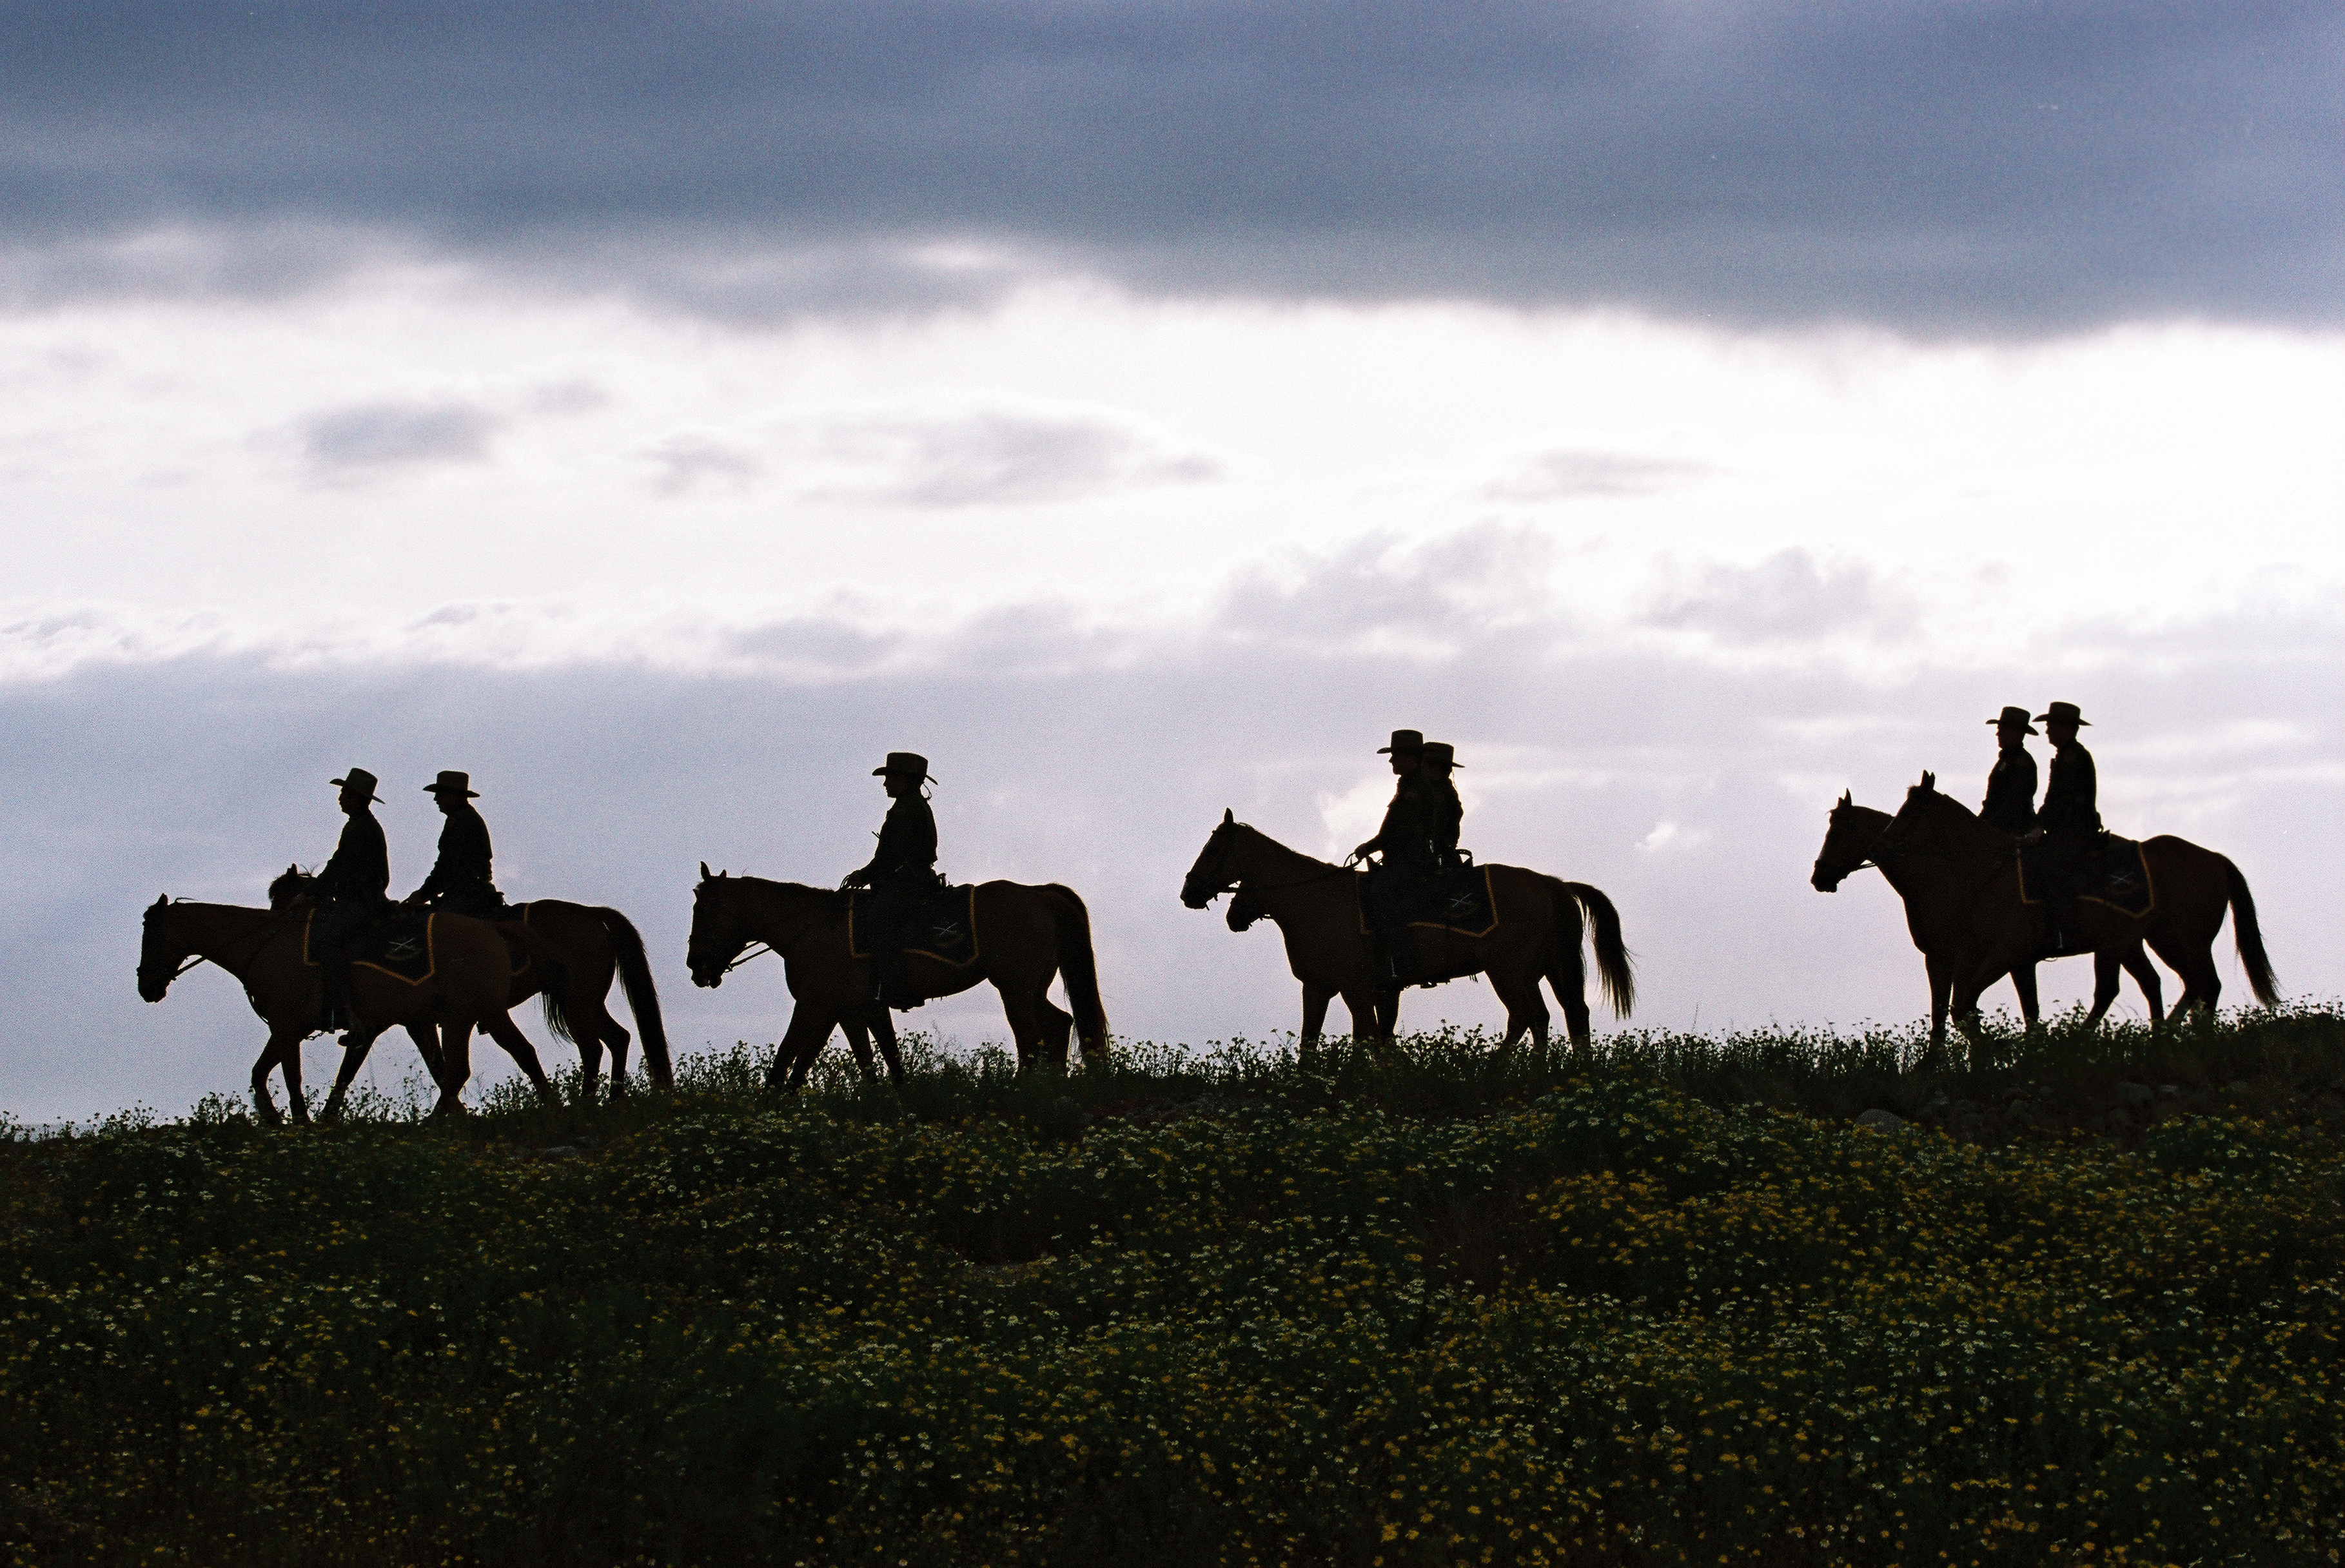 U.S. Border Patrol utilizes horses in difficult terrain to ensure the safety of the nation's border.